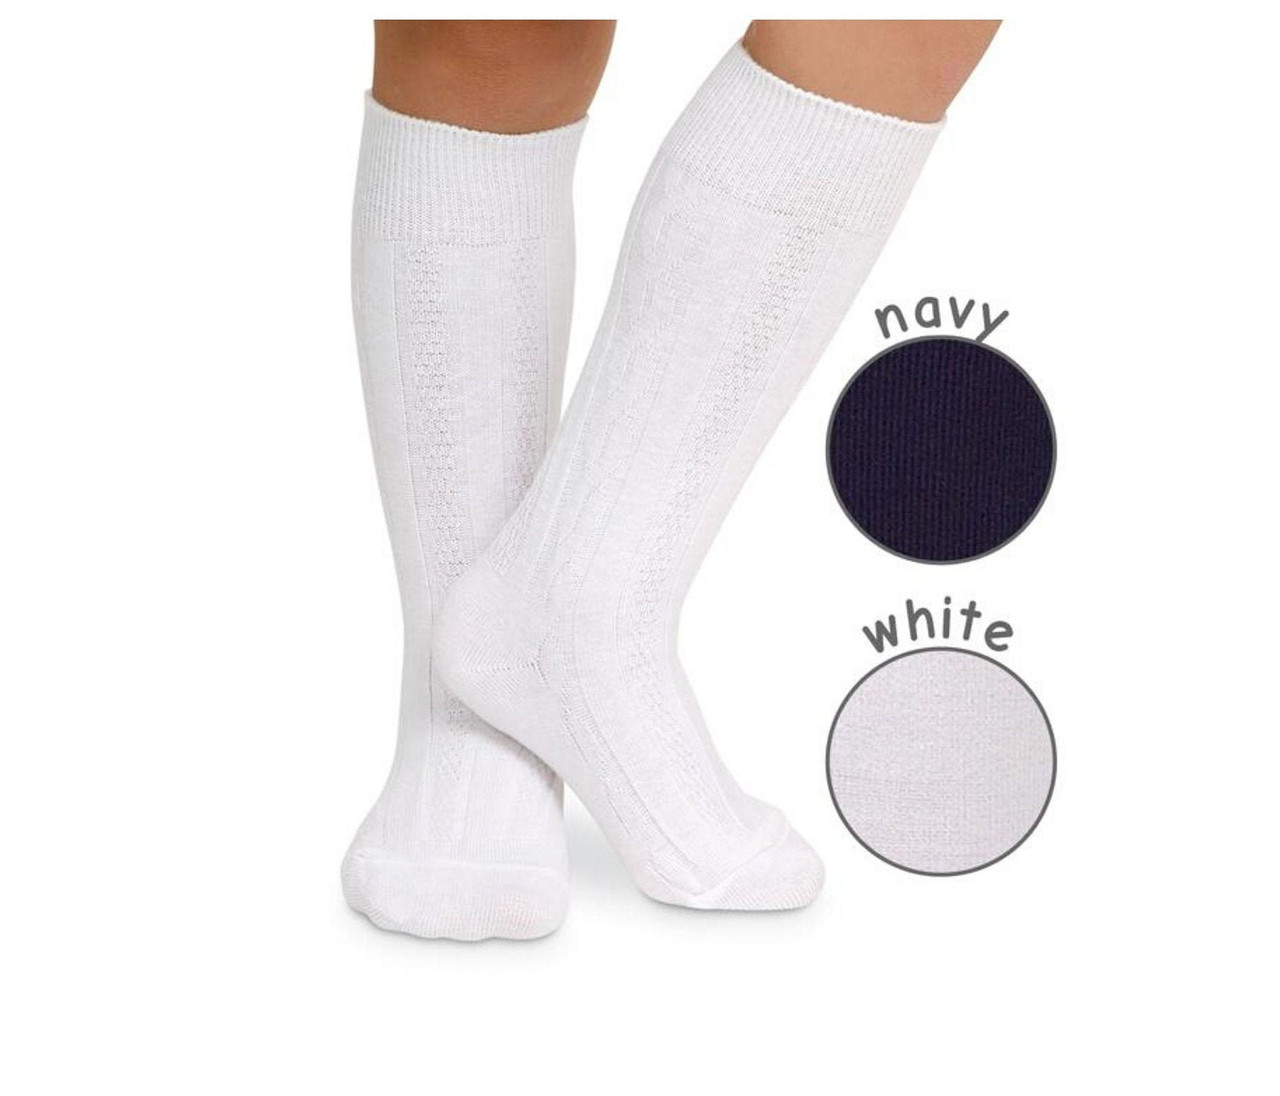 Boy&#39;s White or Navy Cable Knee High Socks - Boy&#39;s Knee Highs, White Knee Highs, Boy&#39;s Dress Socks, Boy&#39;s Navy Knee Highs, Boy&#39;s White Socks